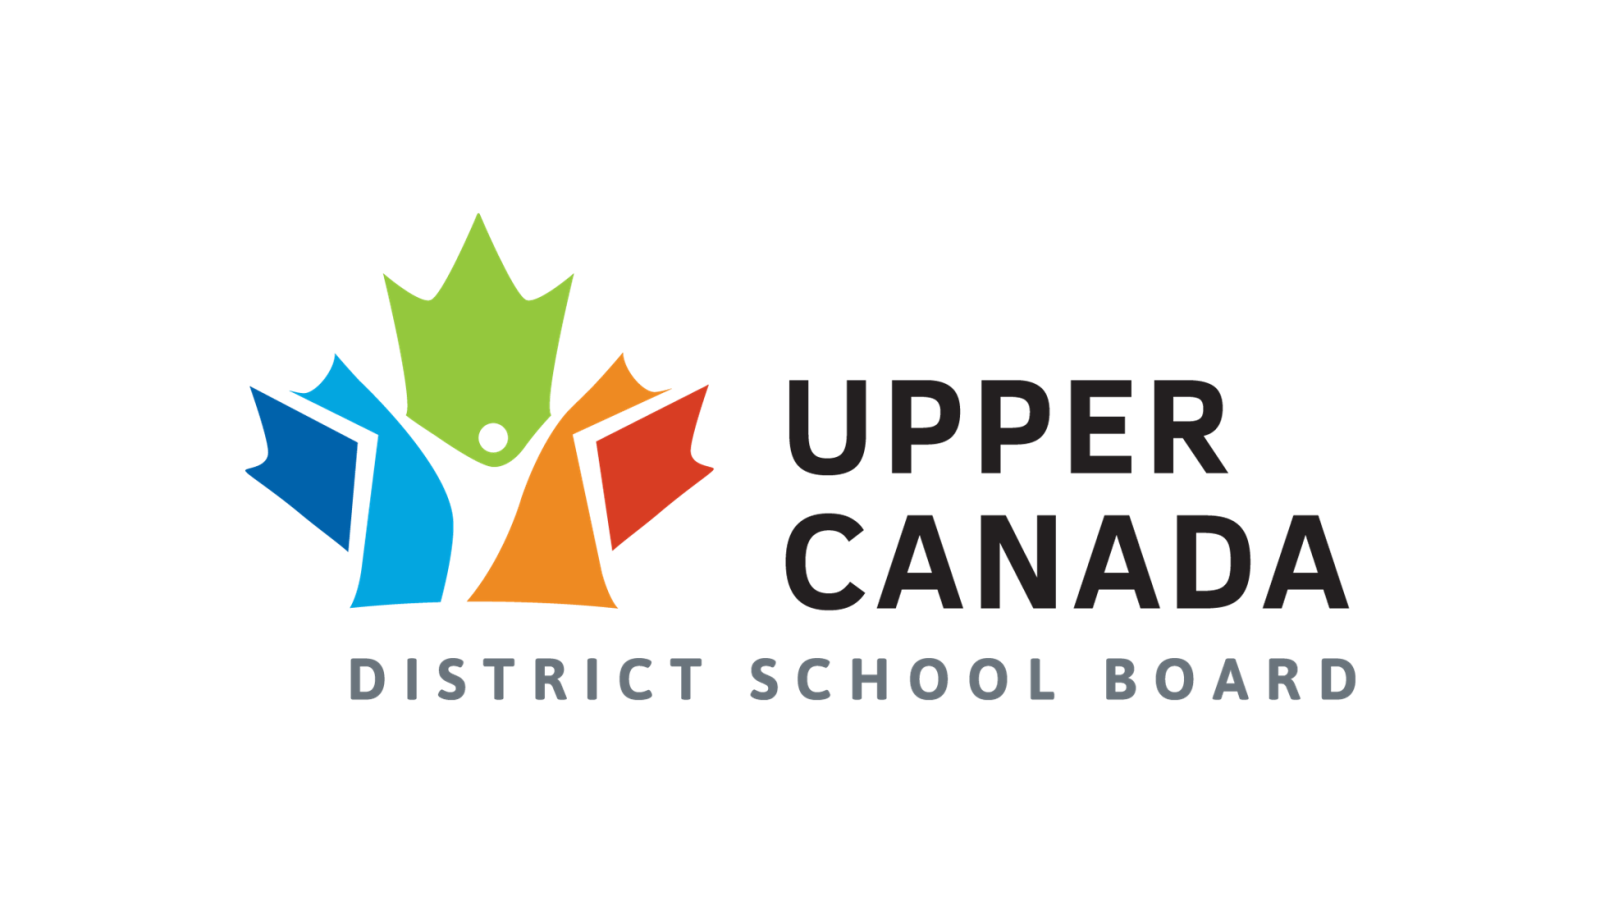 Four vie for vacant UCDSB trustee spot